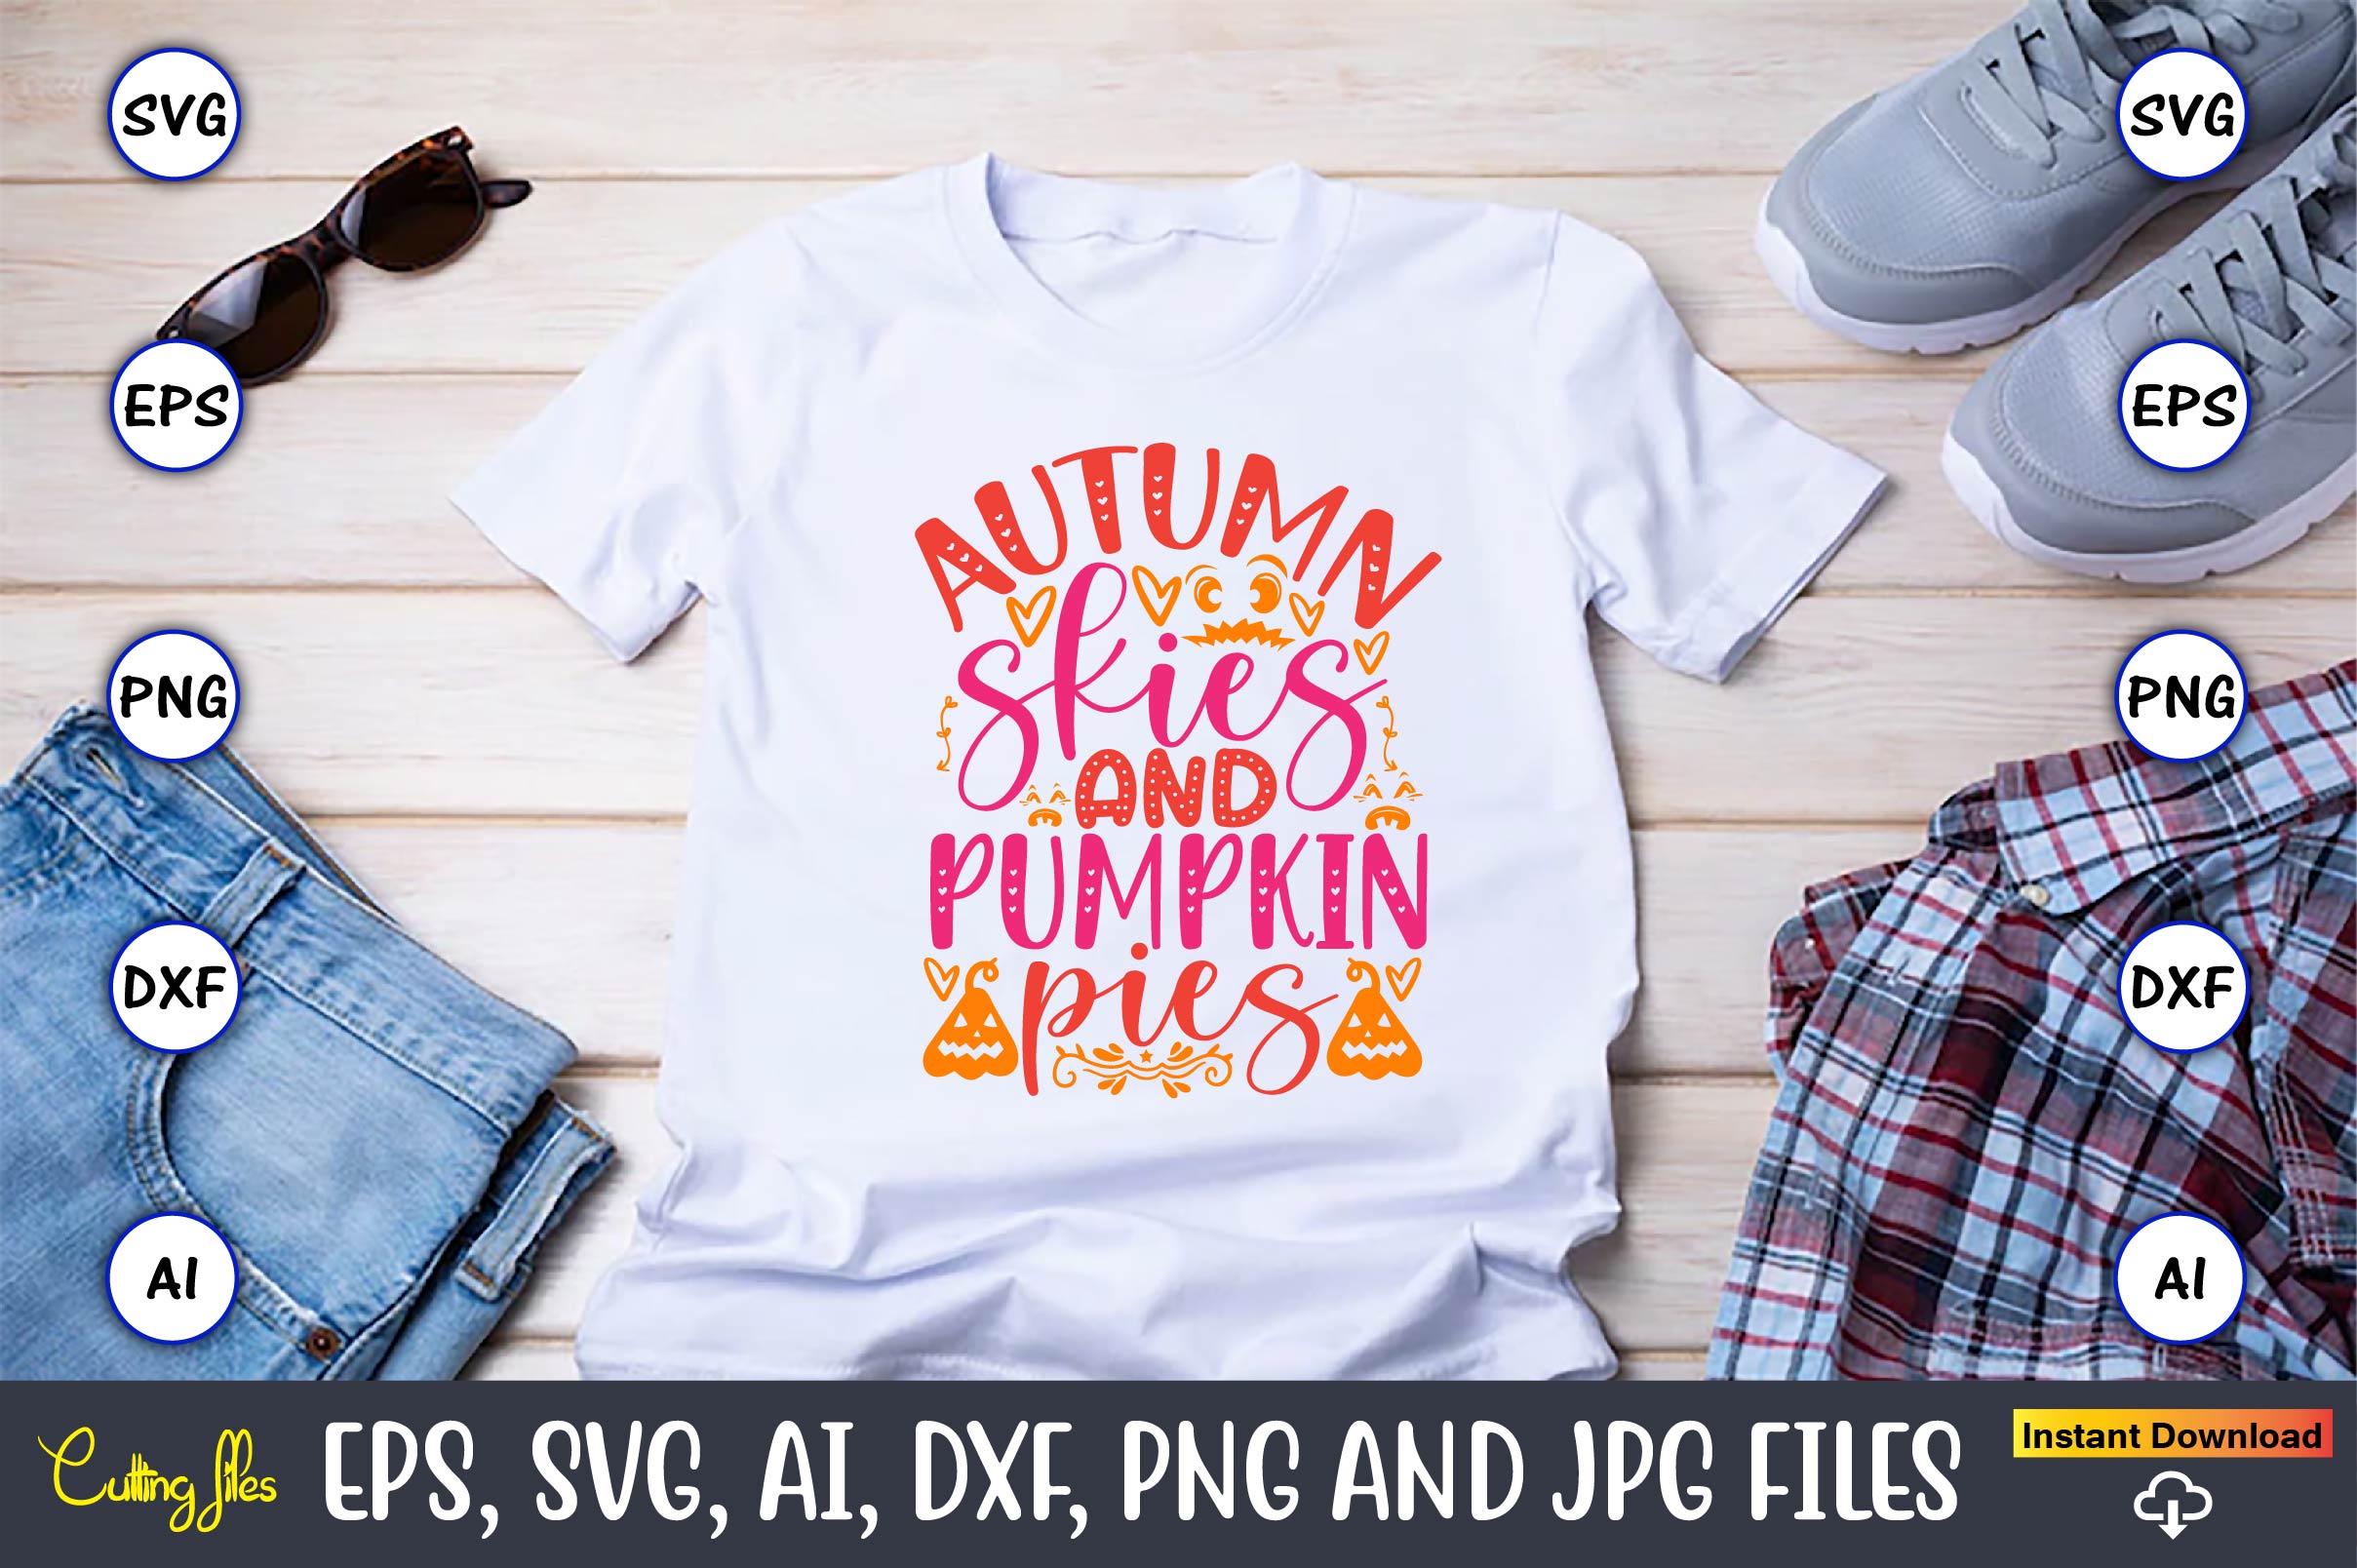 Image of a white t-shirt with an enchanting print Autumn skies and pumpkin pies.